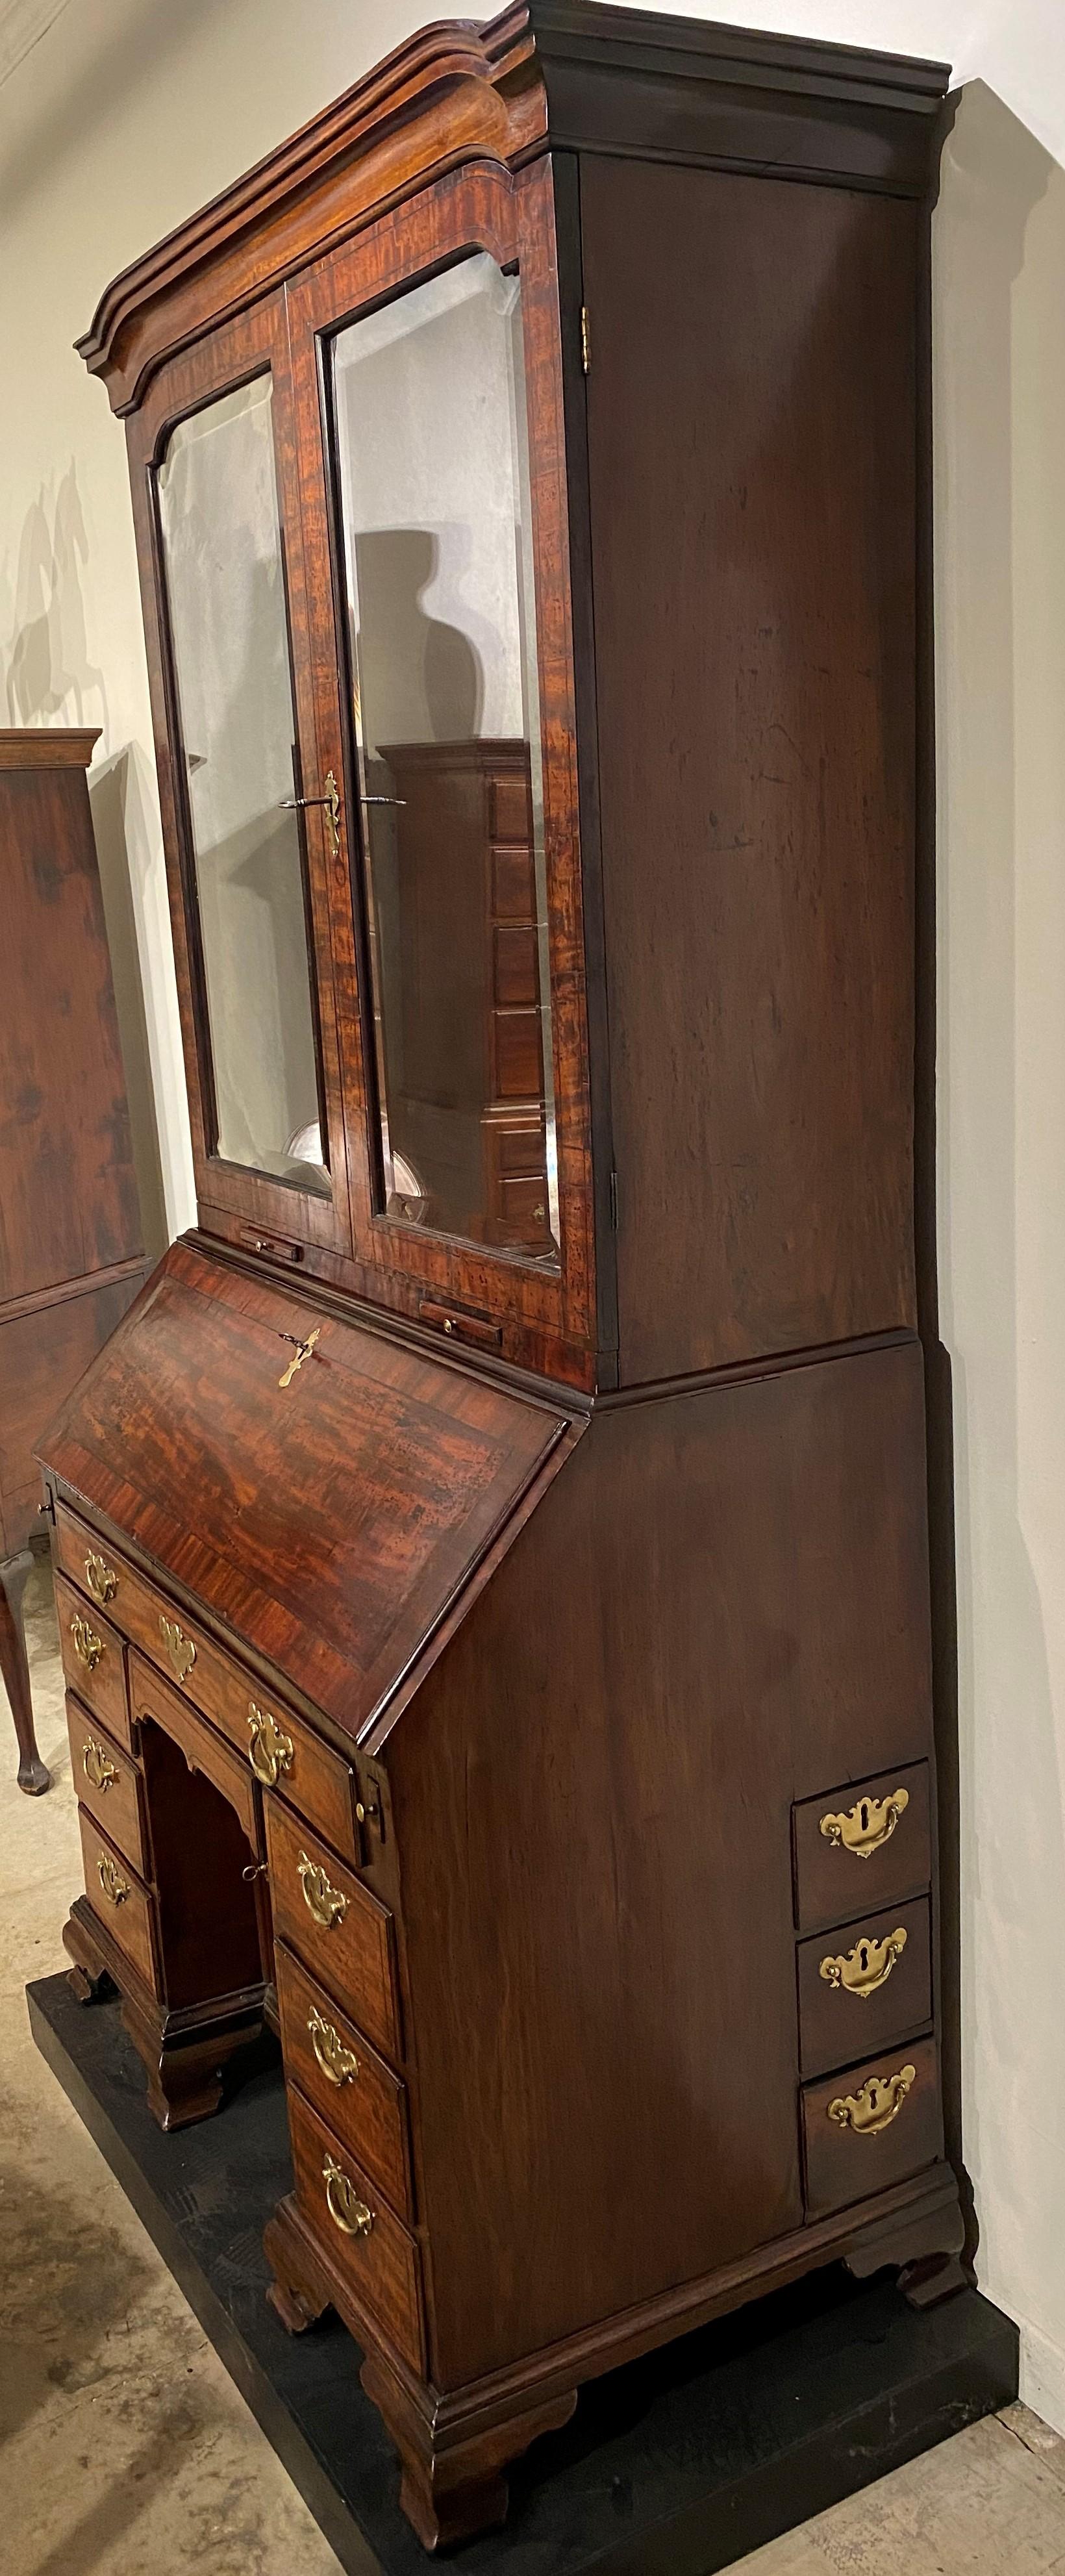 Queen Anne English Mahogany Two-Part Mirrored Secretary with Elaborate Upper Case c 1750-60